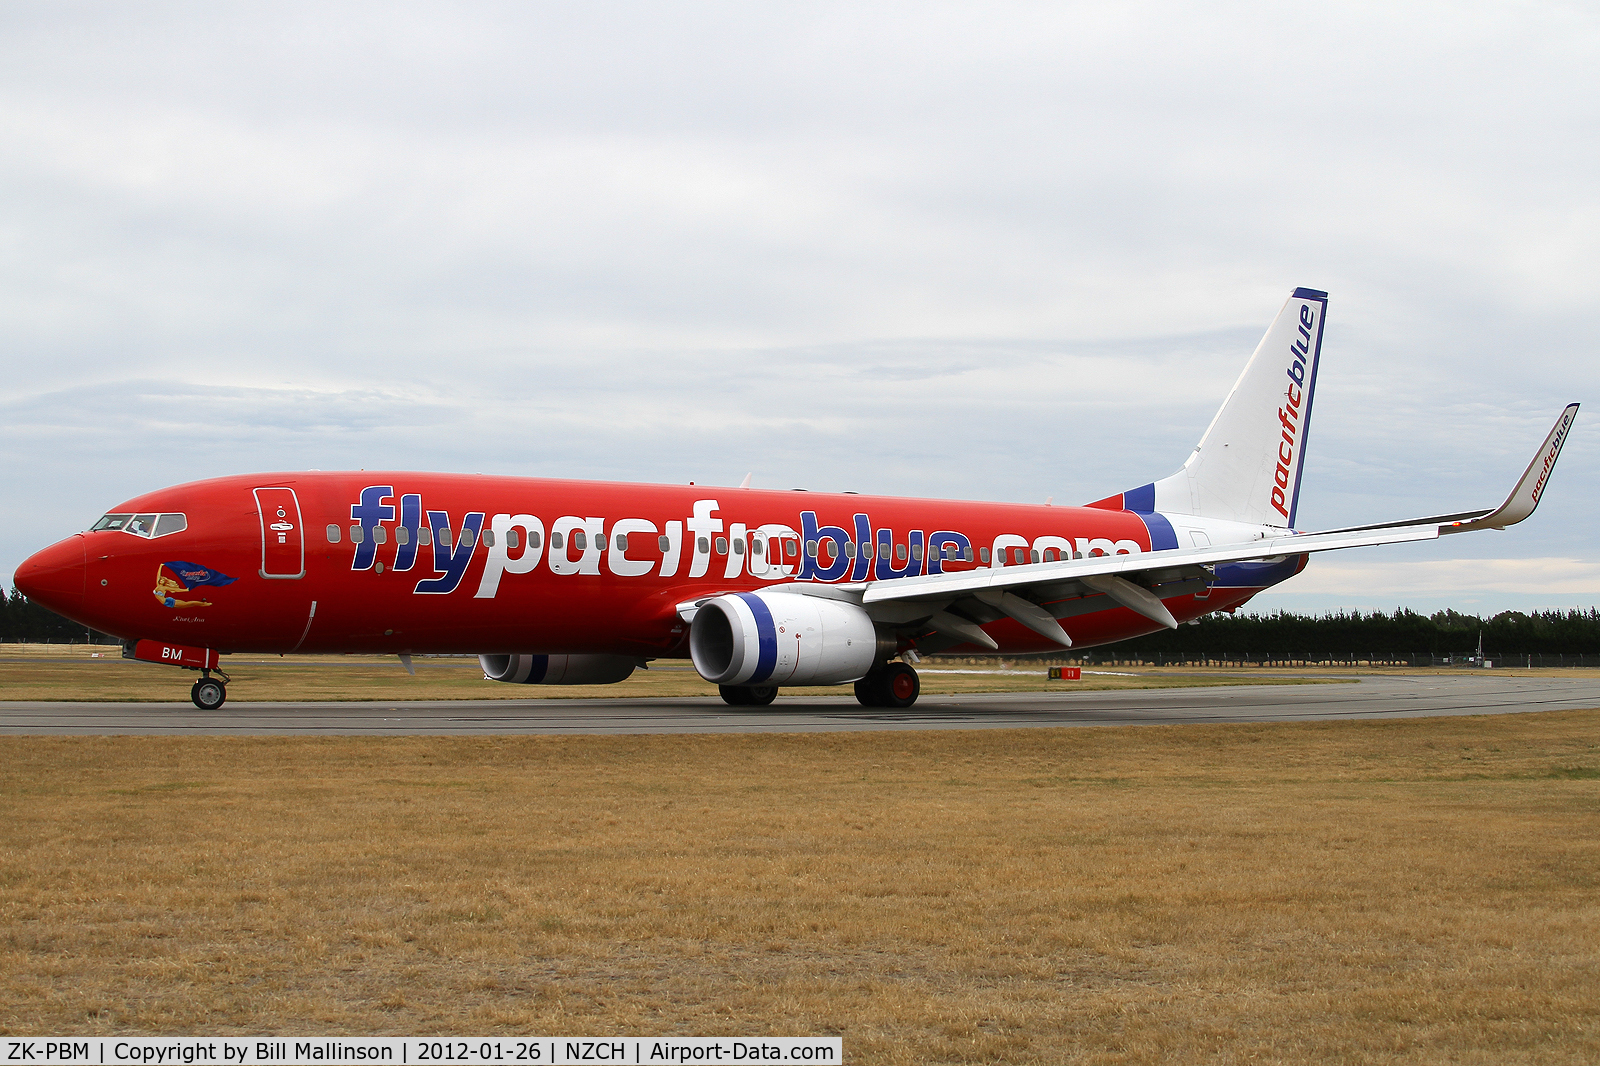 ZK-PBM, 2008 Boeing 737-8FE C/N 36601, taxi from 29